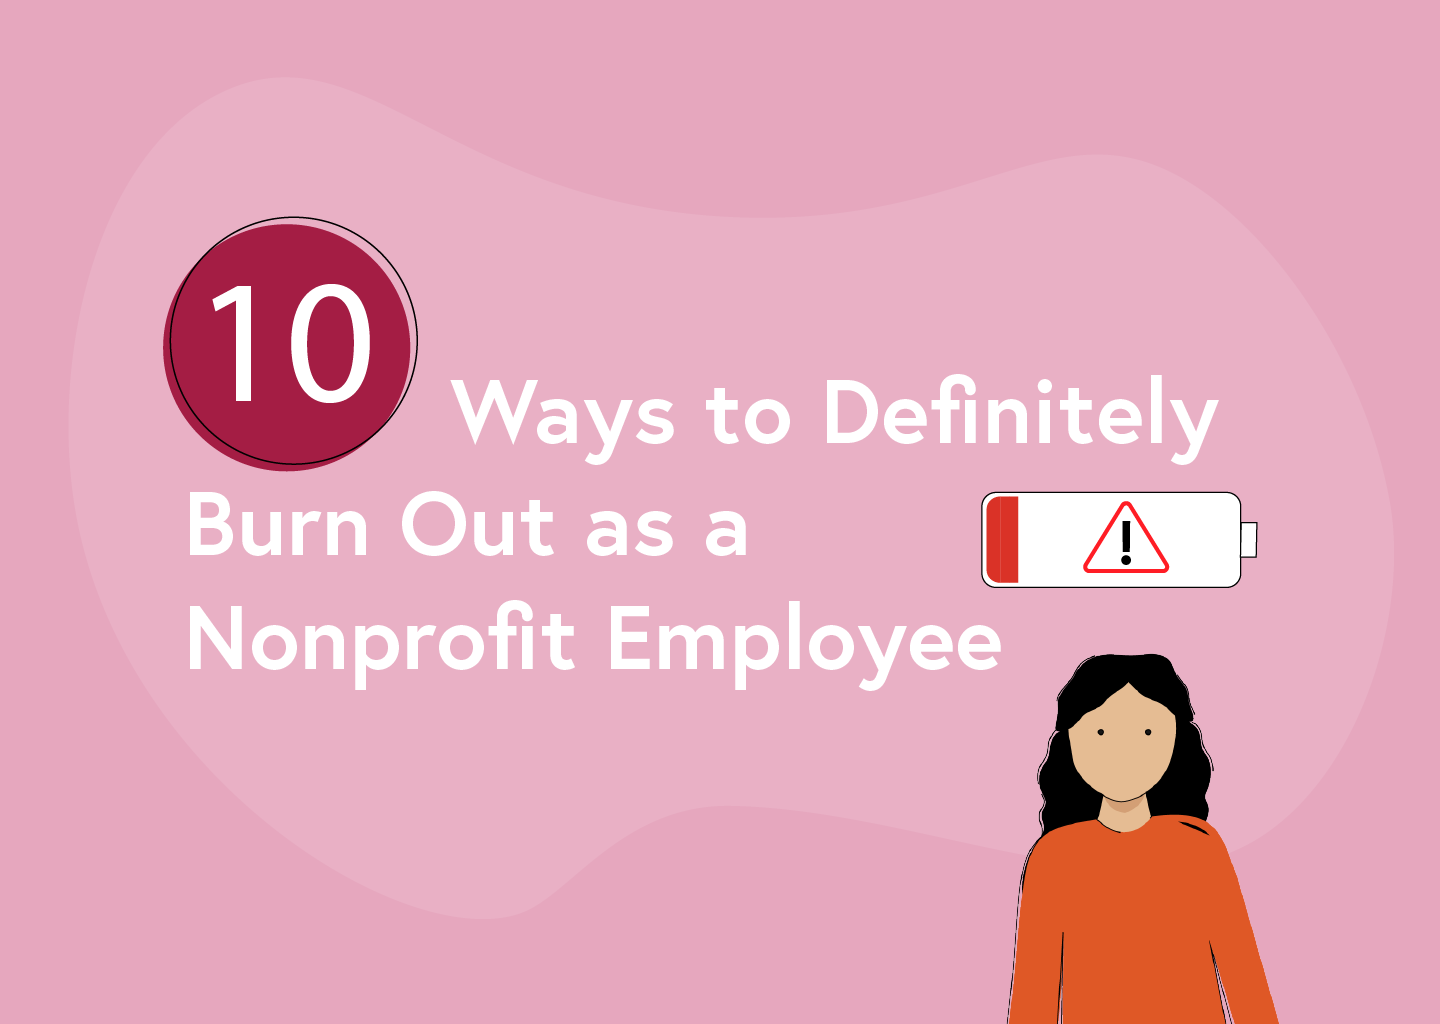 10 Ways to Definitely Burn Out as a Nonprofit Employee